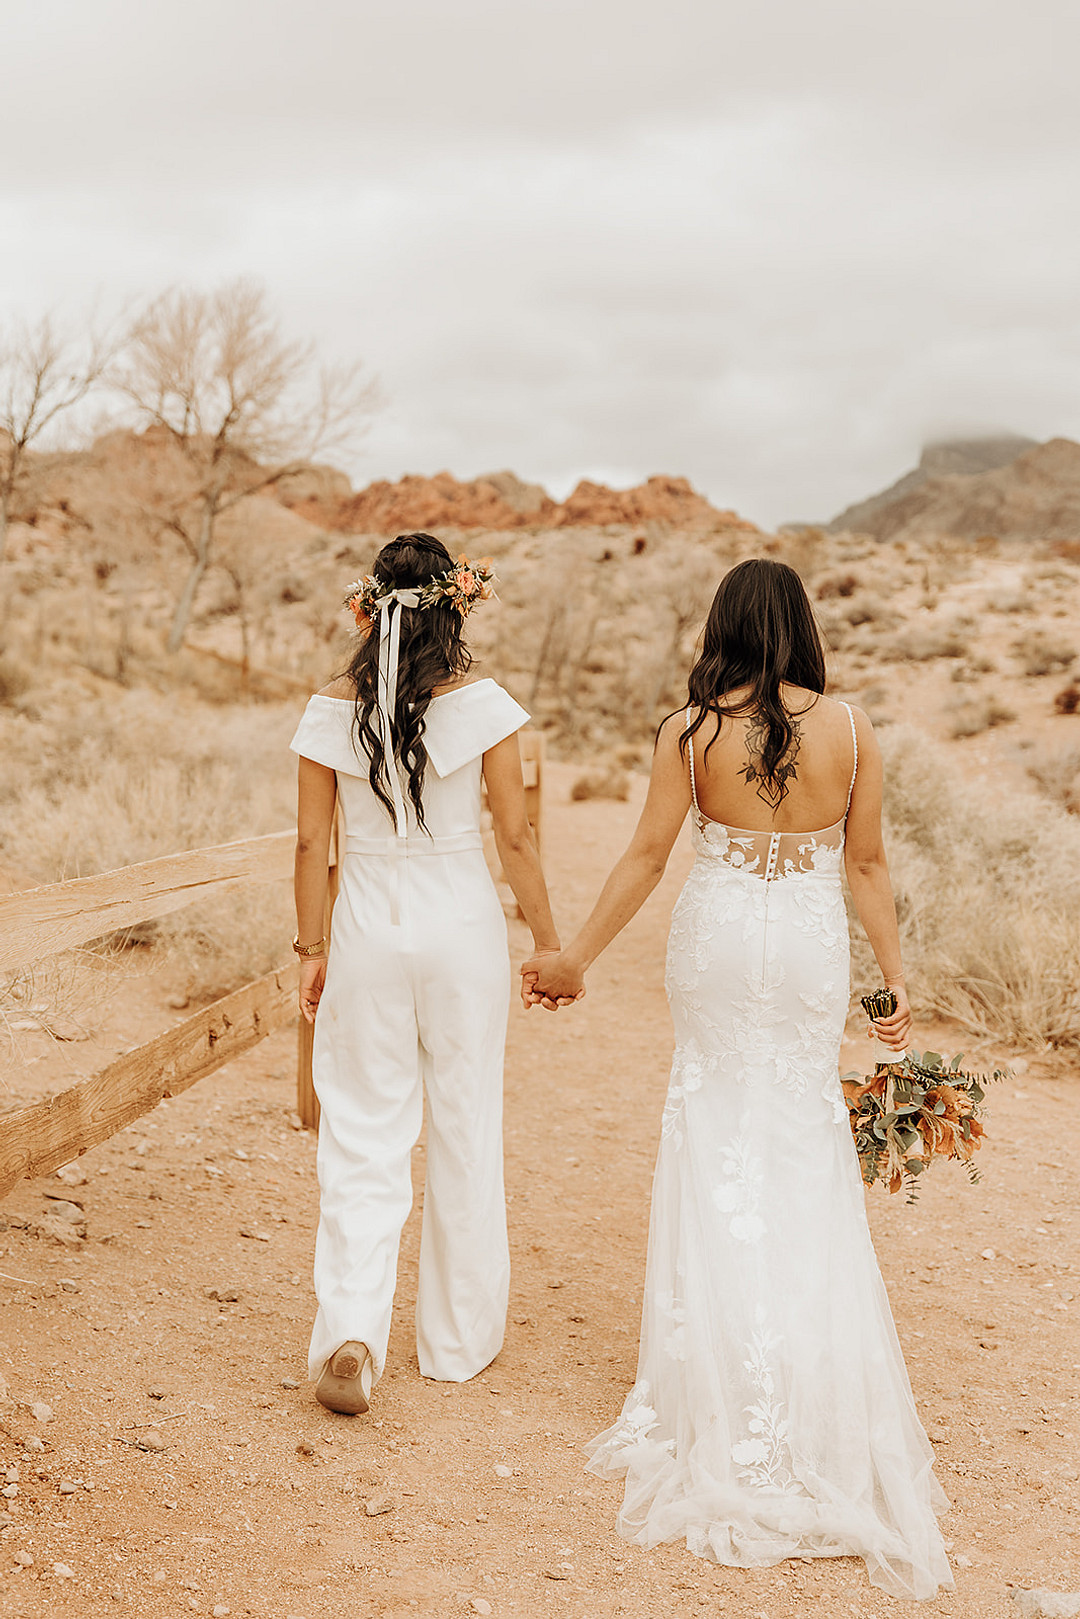 Lesbian brides hold hands in Red Rock Canyon State Park.